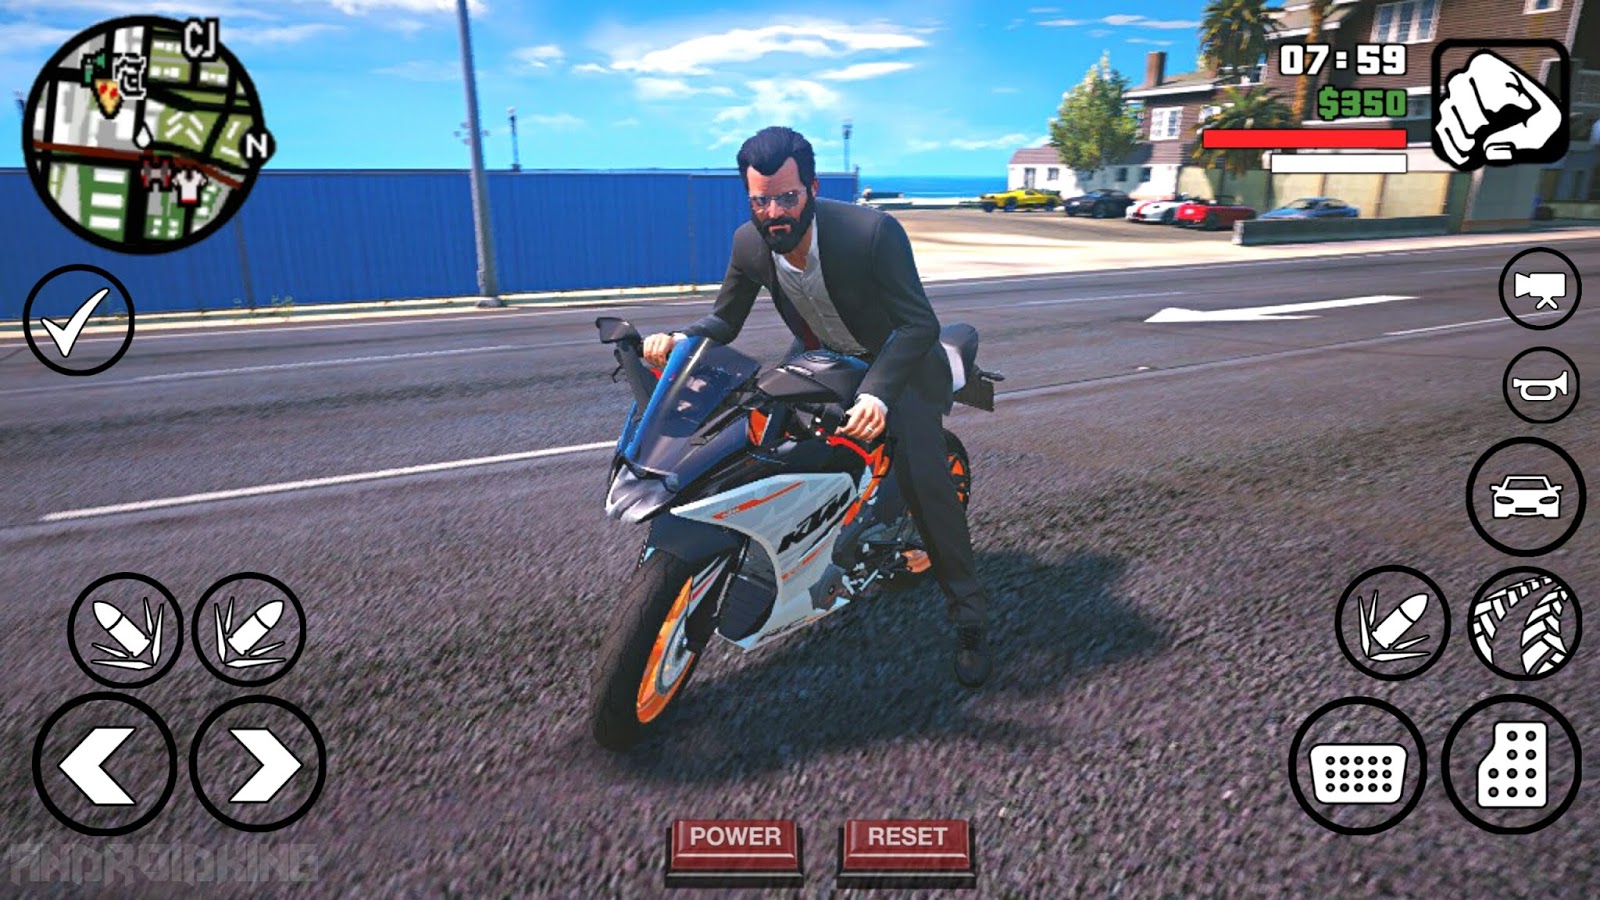 Gta 5 for ppsspp фото 43